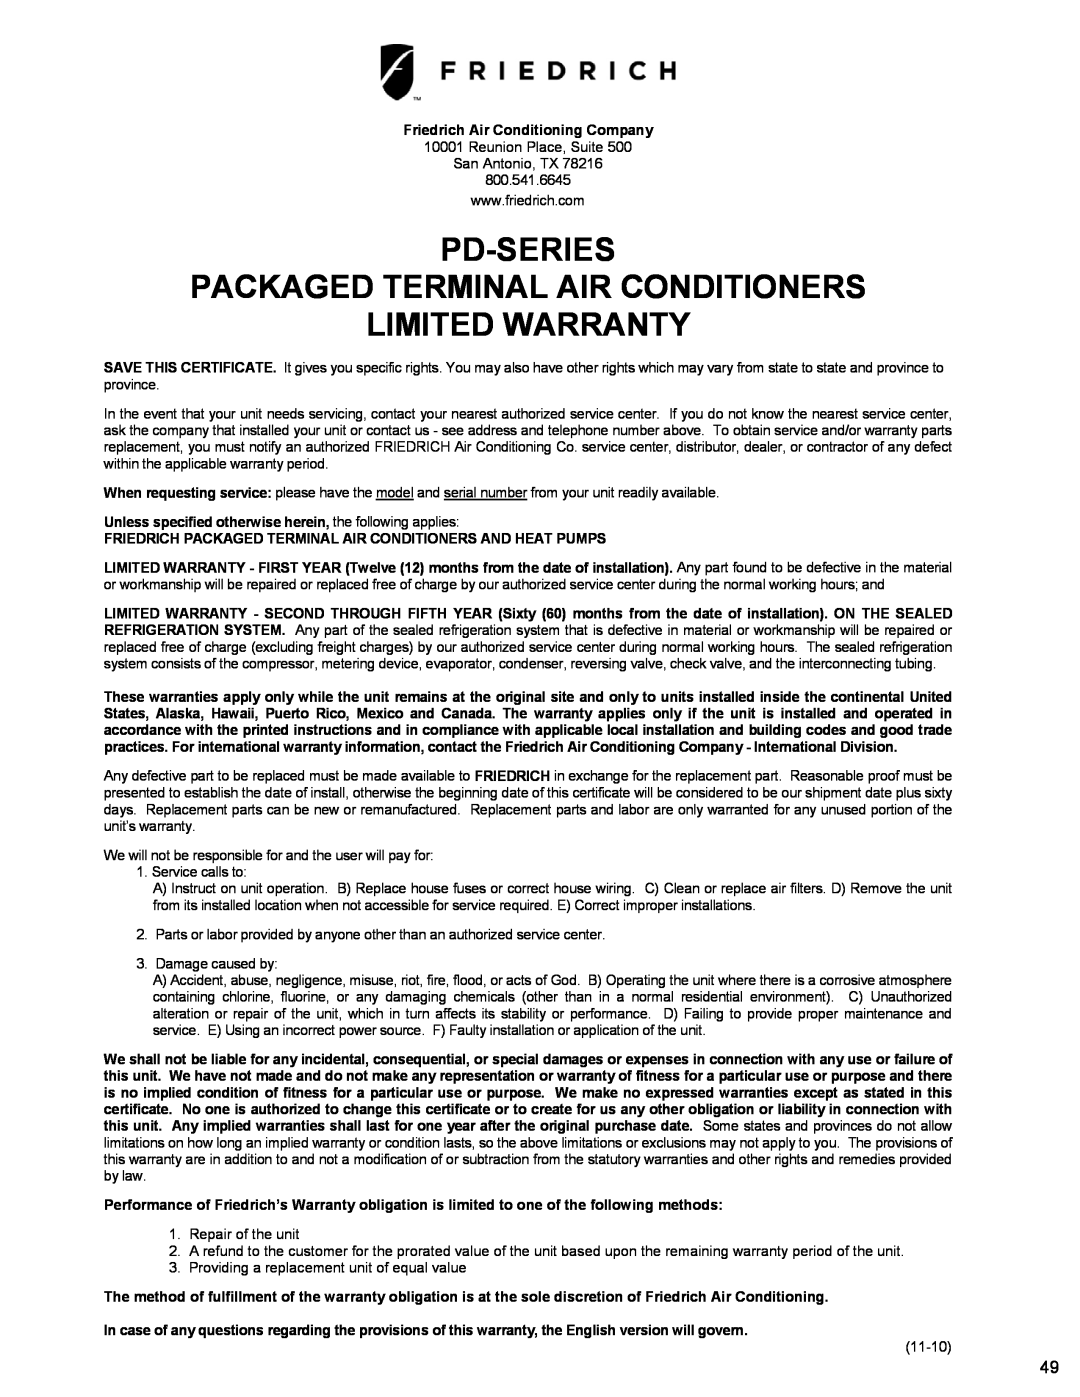 Friedrich PTAC - R410A Pd-Series Packaged Terminal Air Conditioners, Limited Warranty, Friedrich Air Conditioning Company 